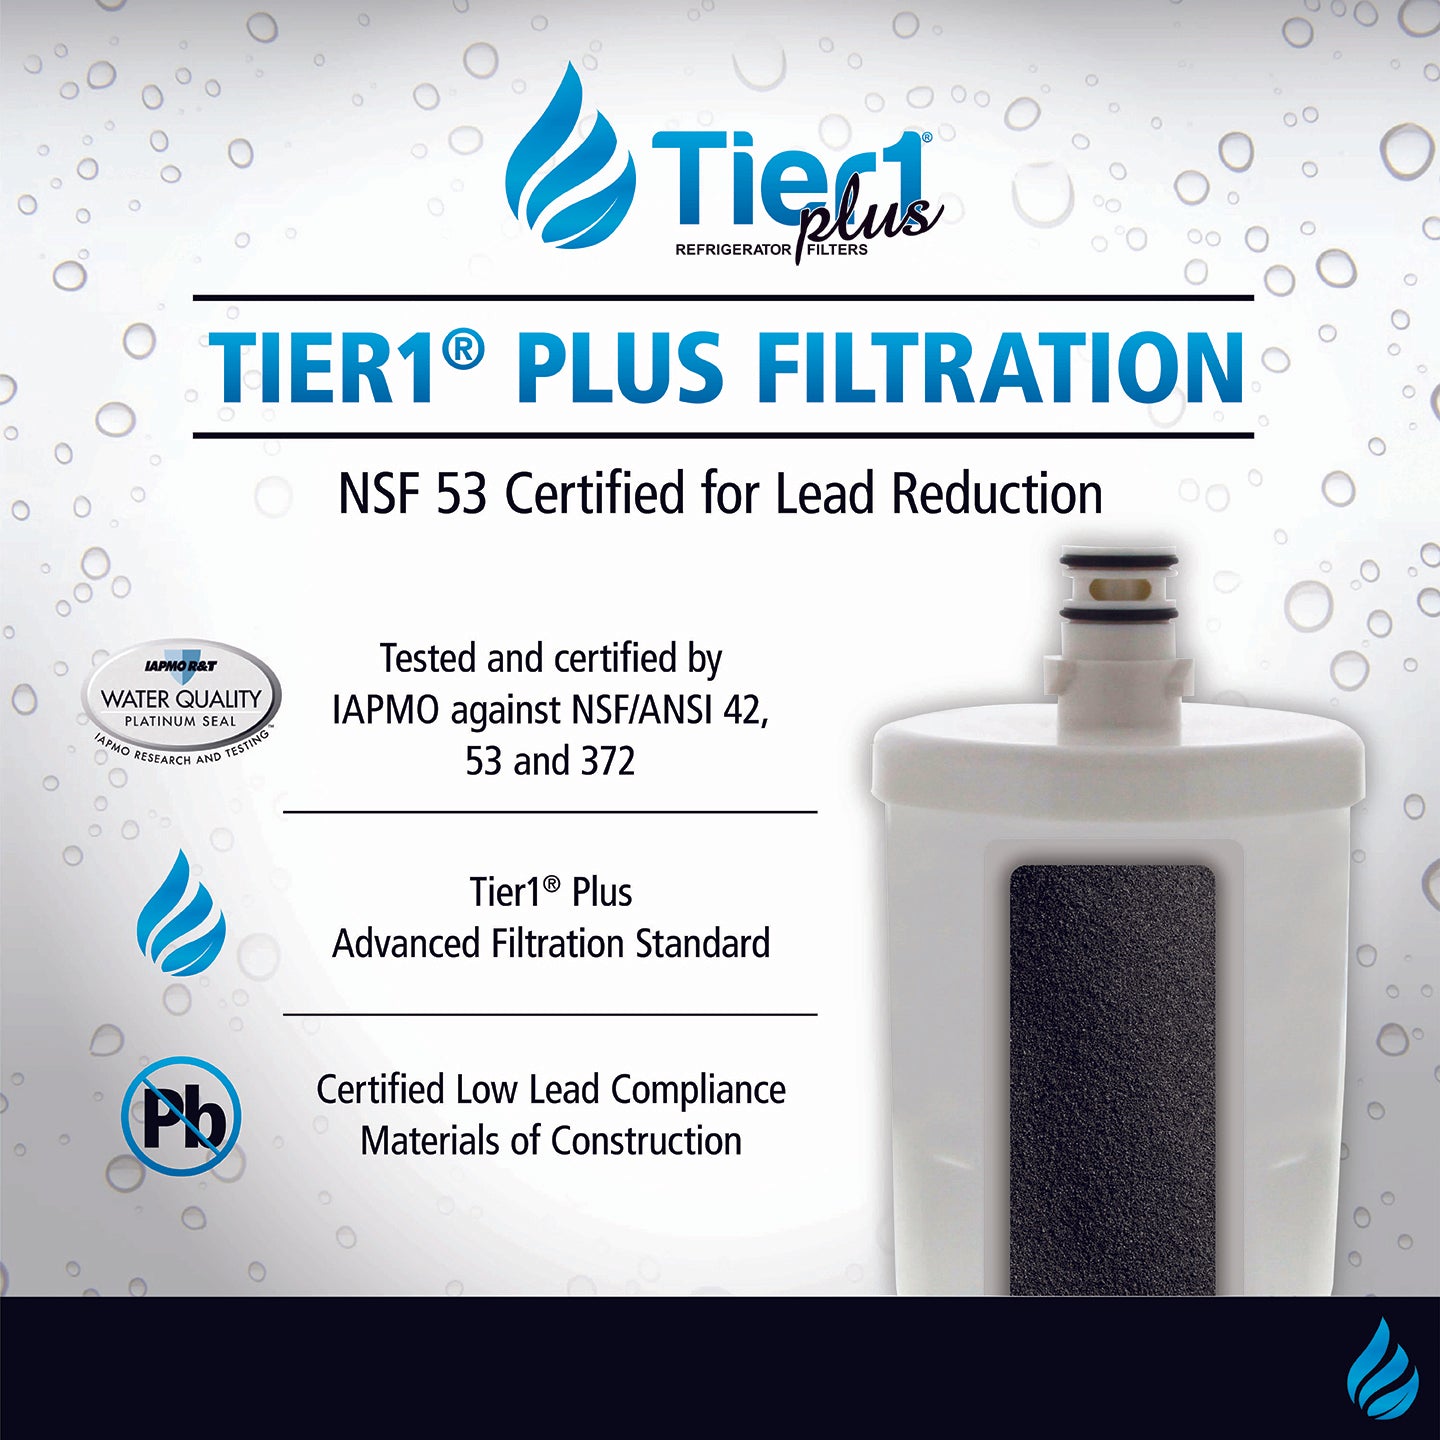 5231JA2002A / LT500P LG Comparable Tier1 Plus Refrigerator Water Filter Replacement (Tier1 Plus Filtration)